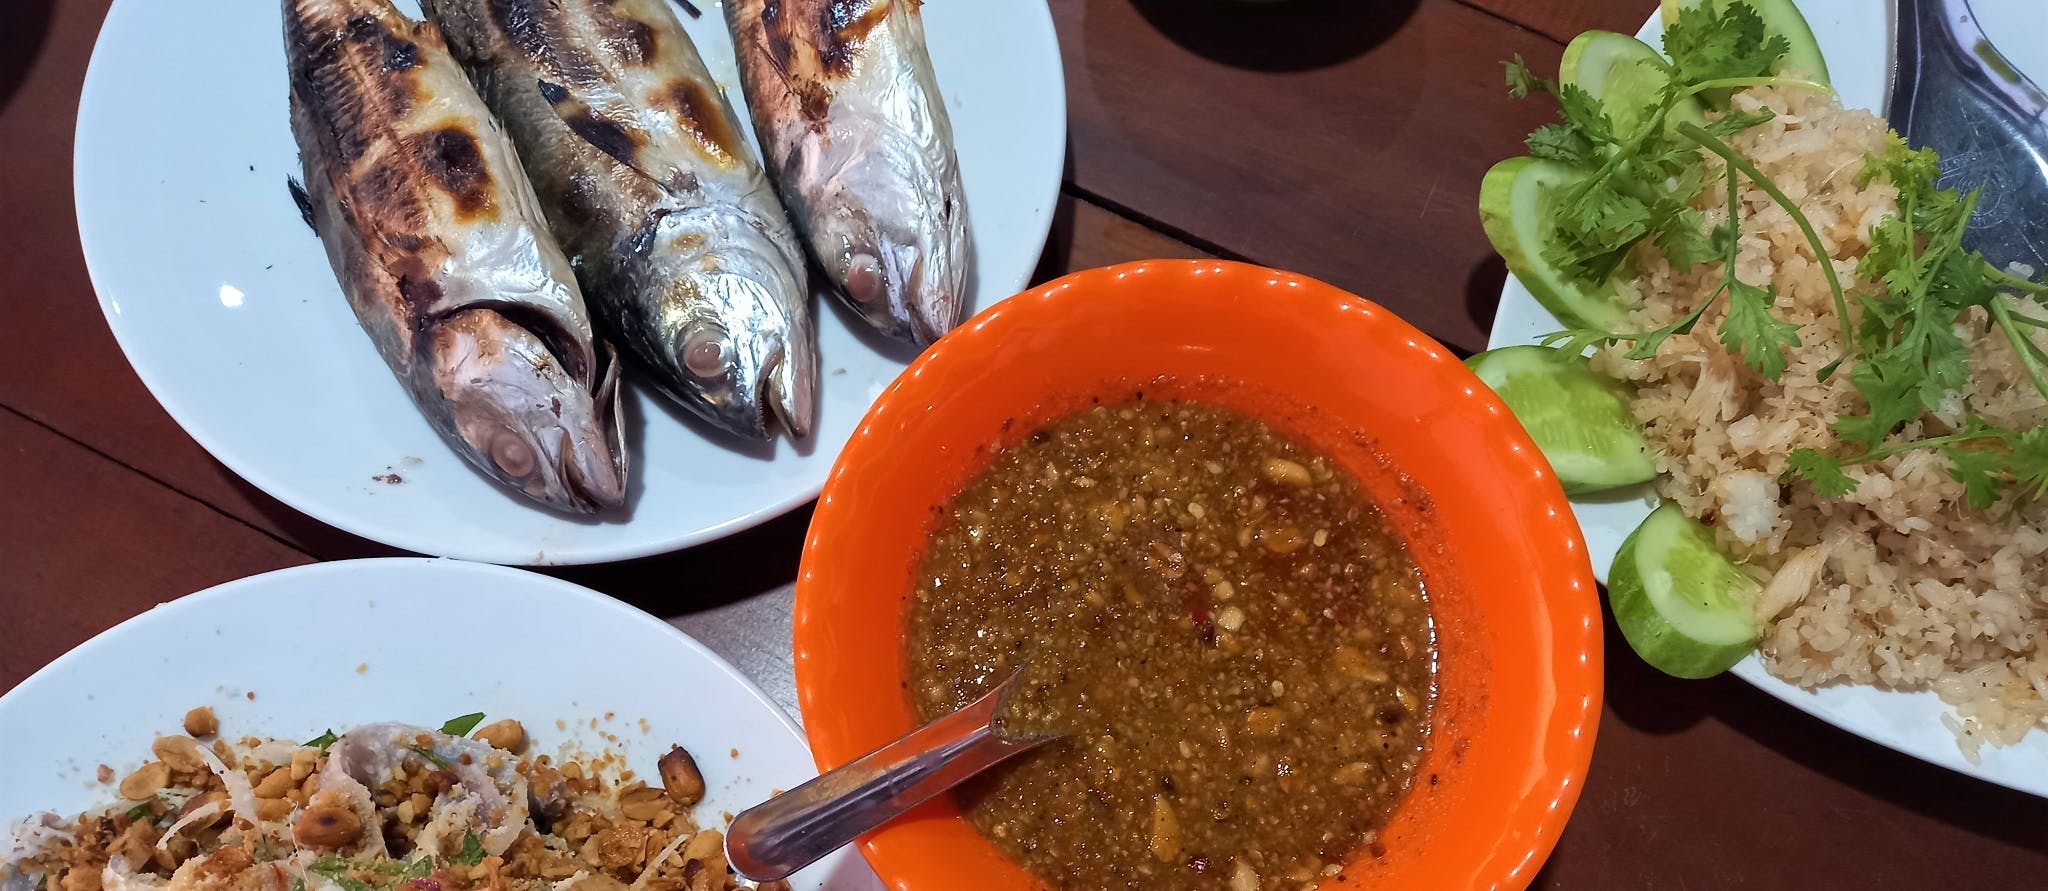 Where to Eat Seafood on Phu Quoc Island